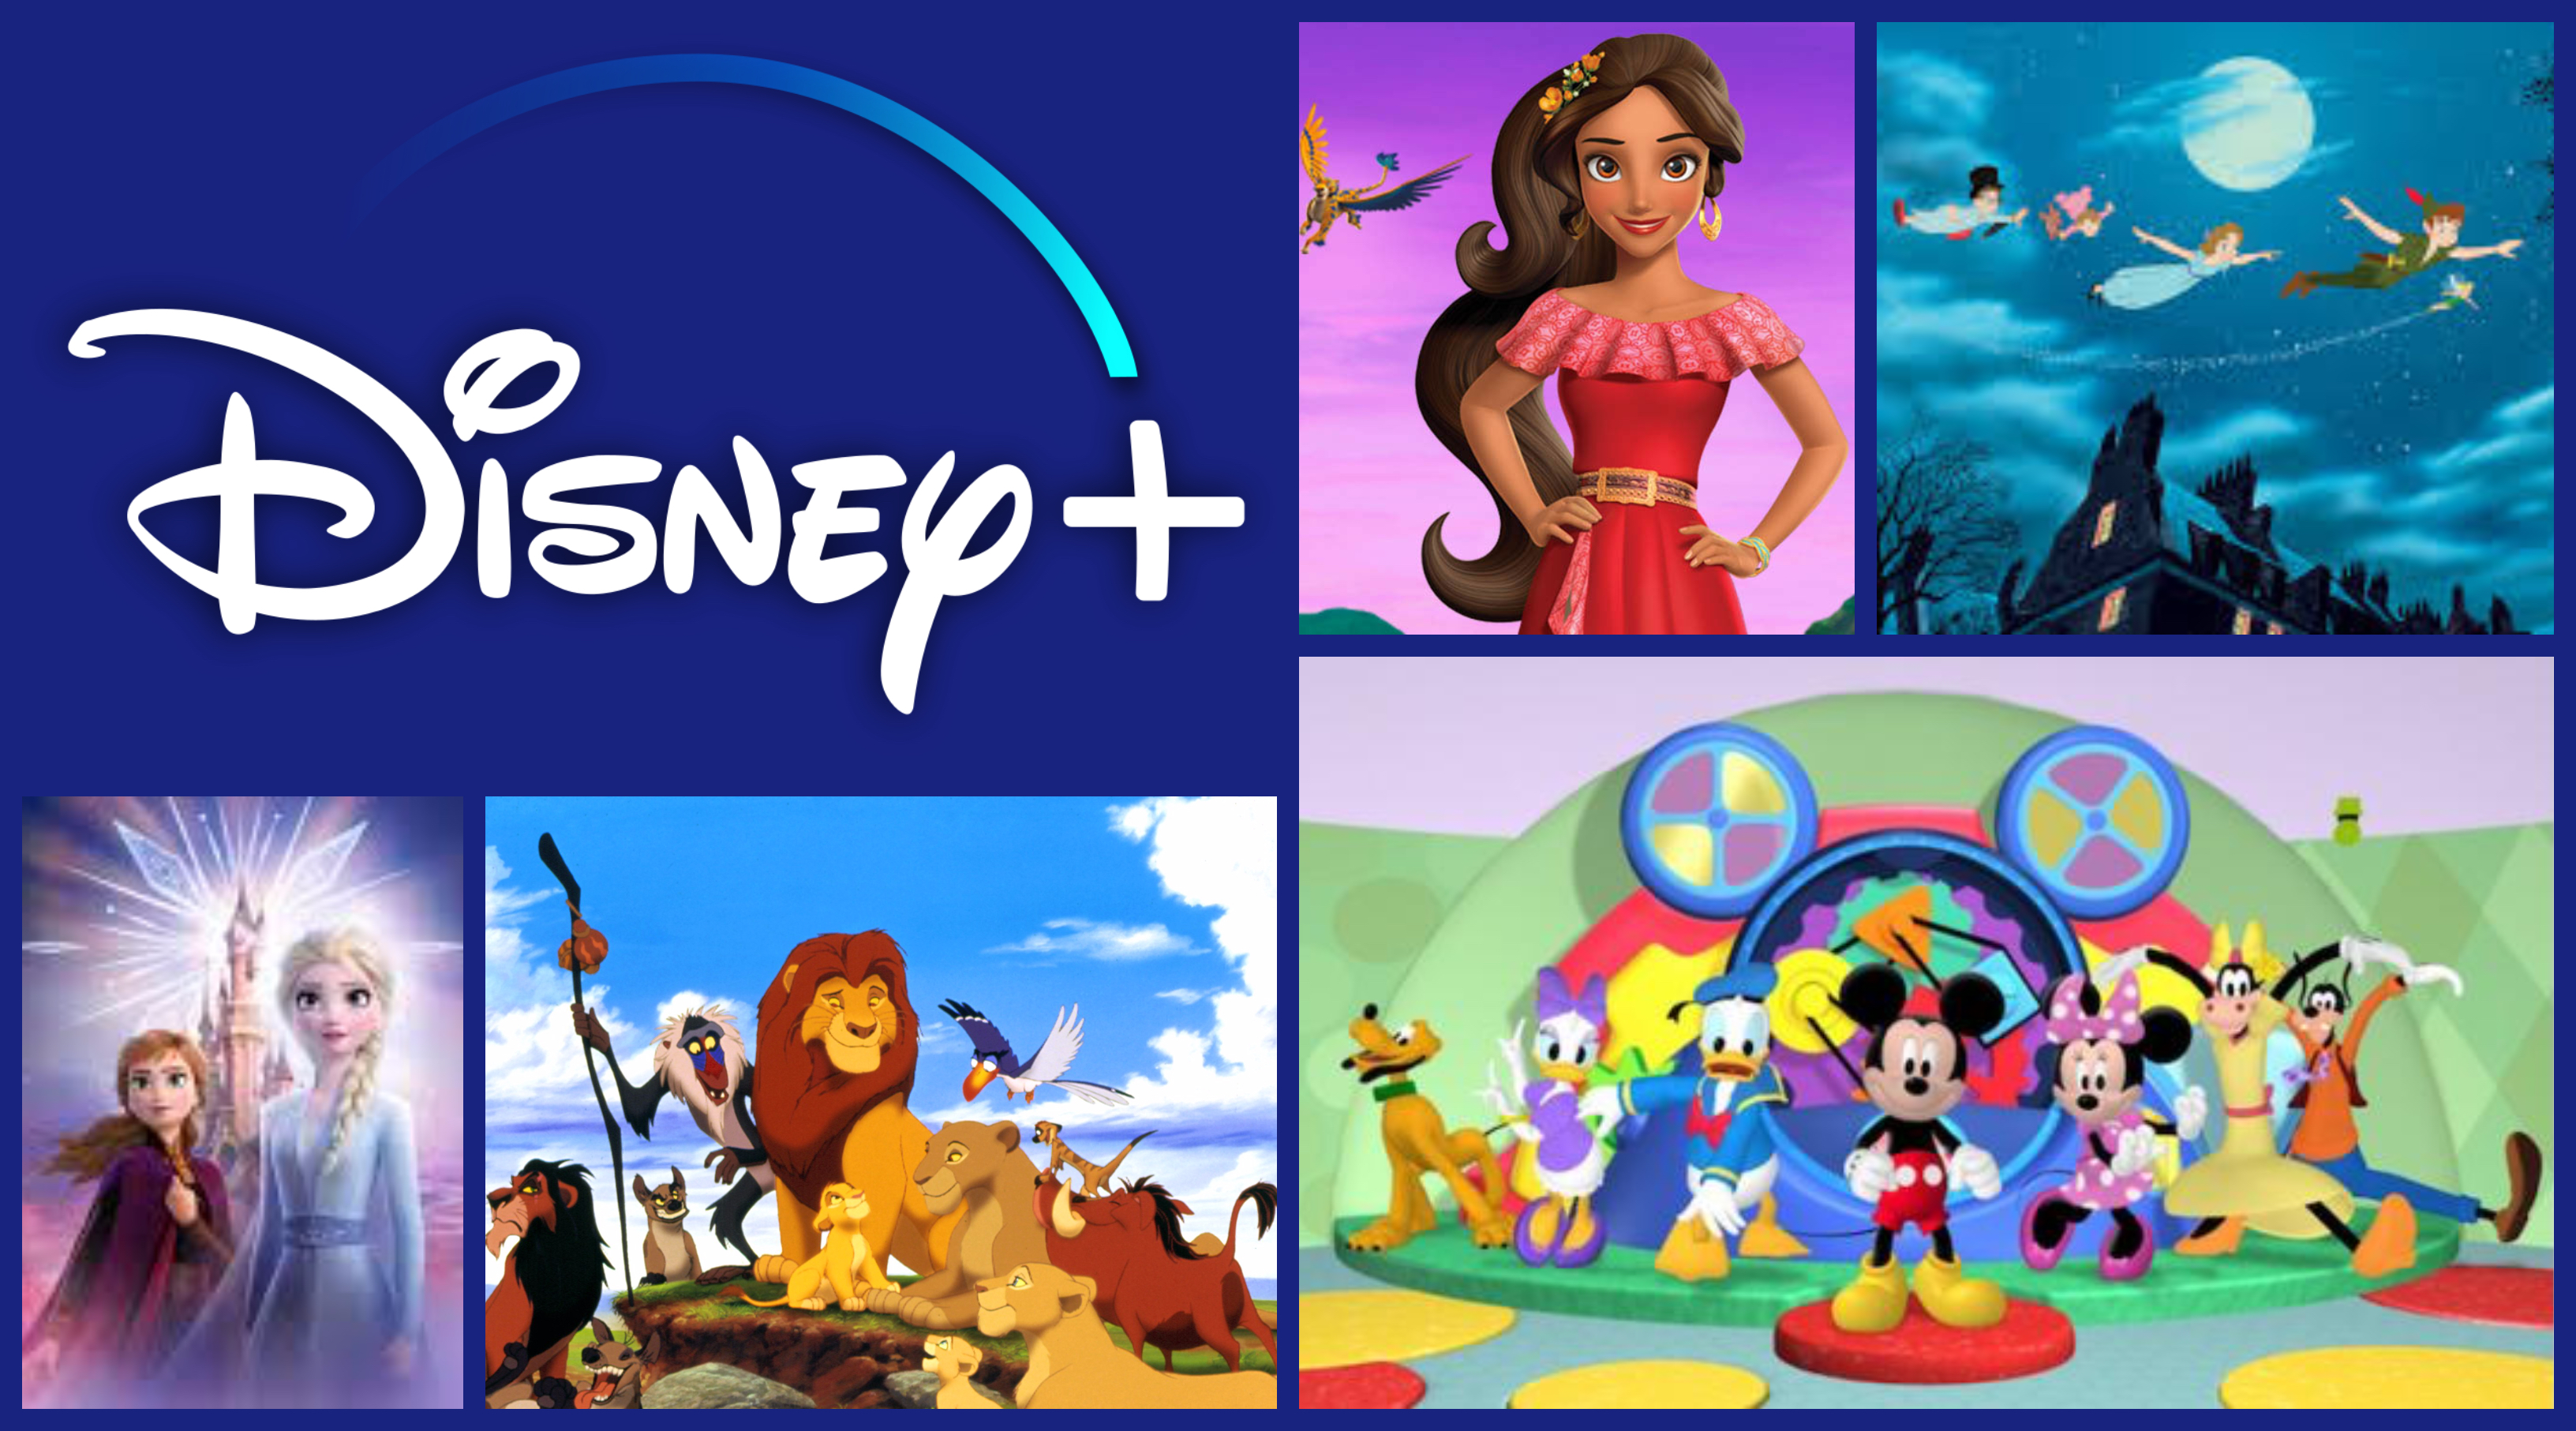 Disney+ Offers “Kids Mode” For Family Friendly Viewing